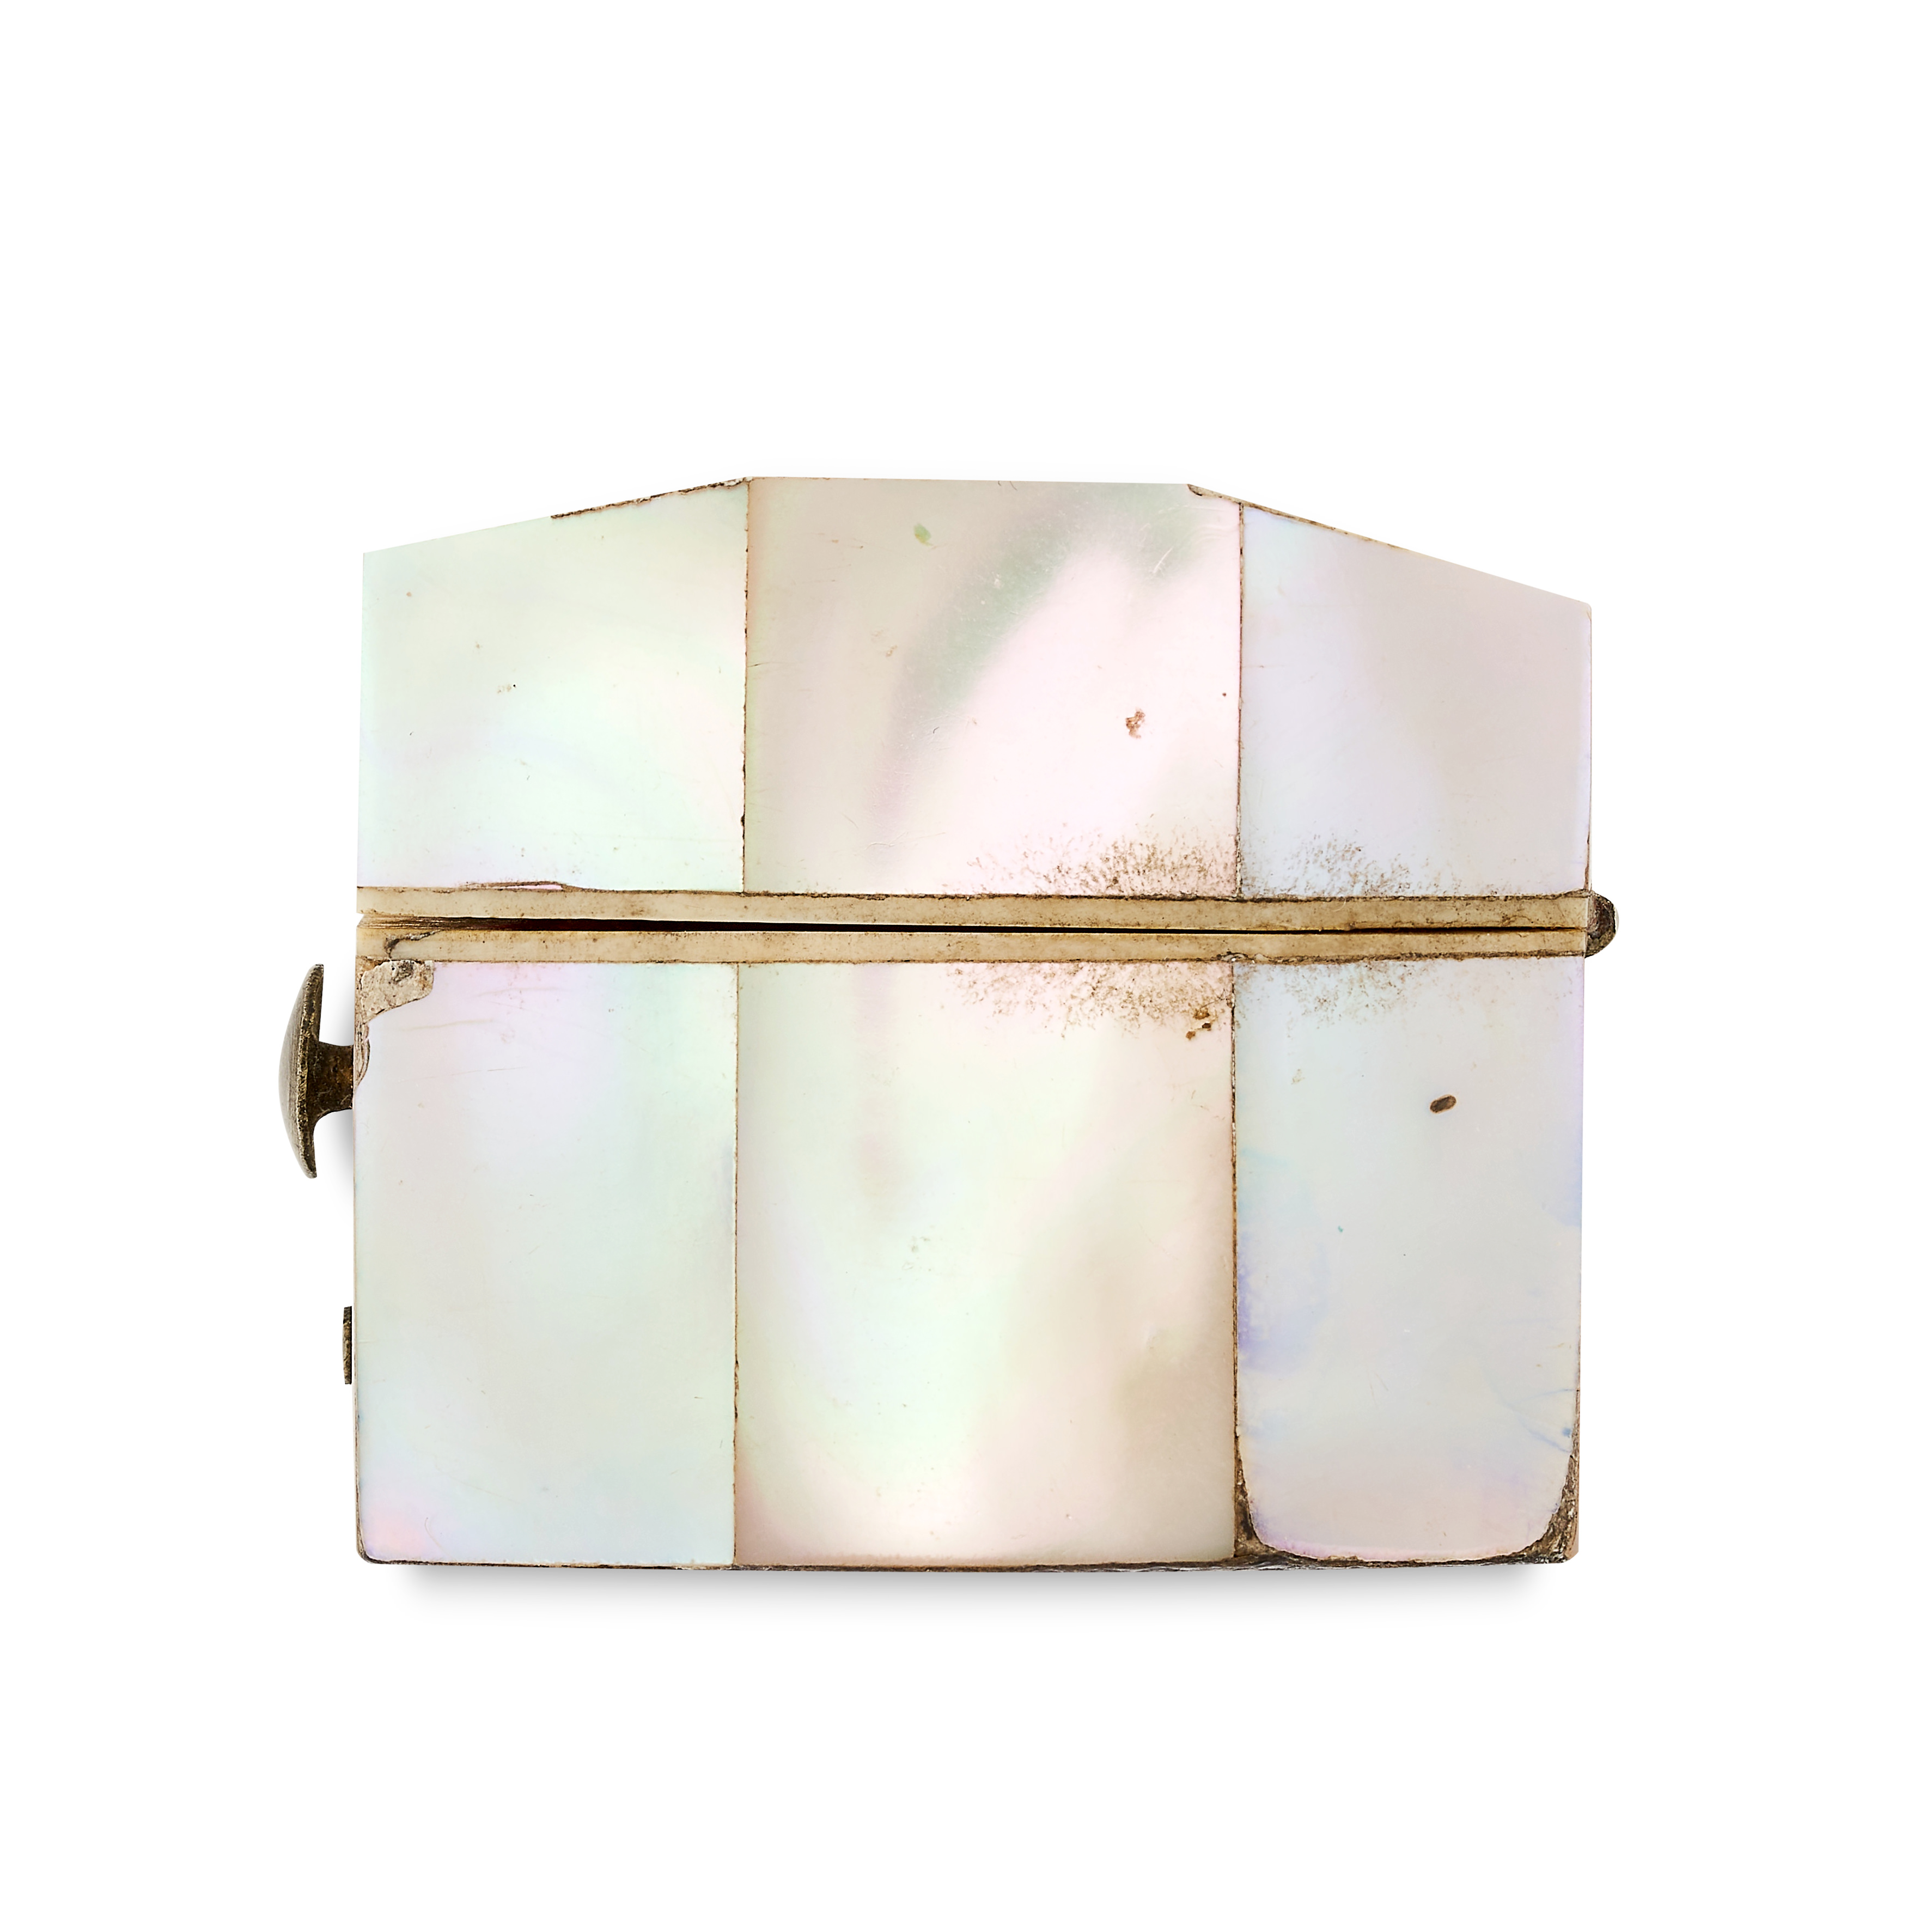 NO RESERVE - AN ANTIQUE MOTHER OF PEARL RING JEWELLERY BOX the hinged body inlaid with panels of - Image 2 of 3